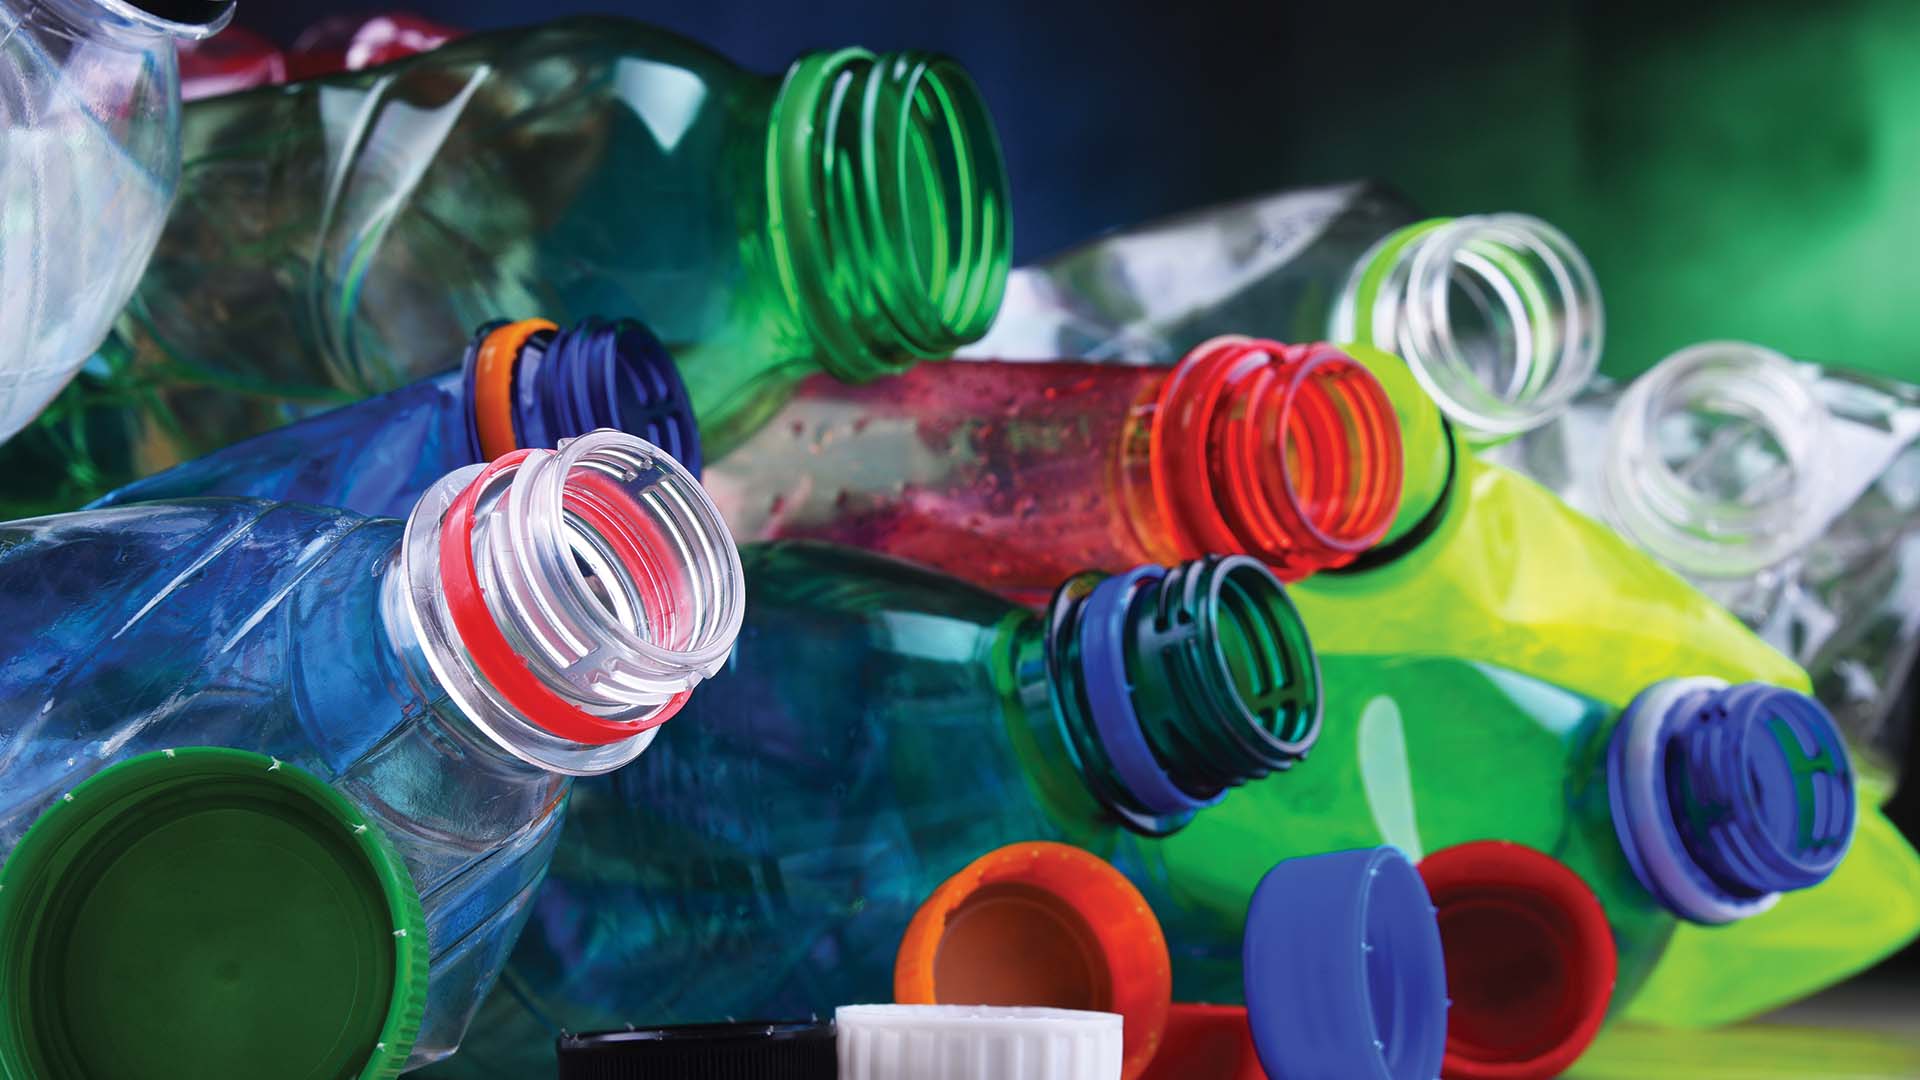 Plastic bottles made with BPA